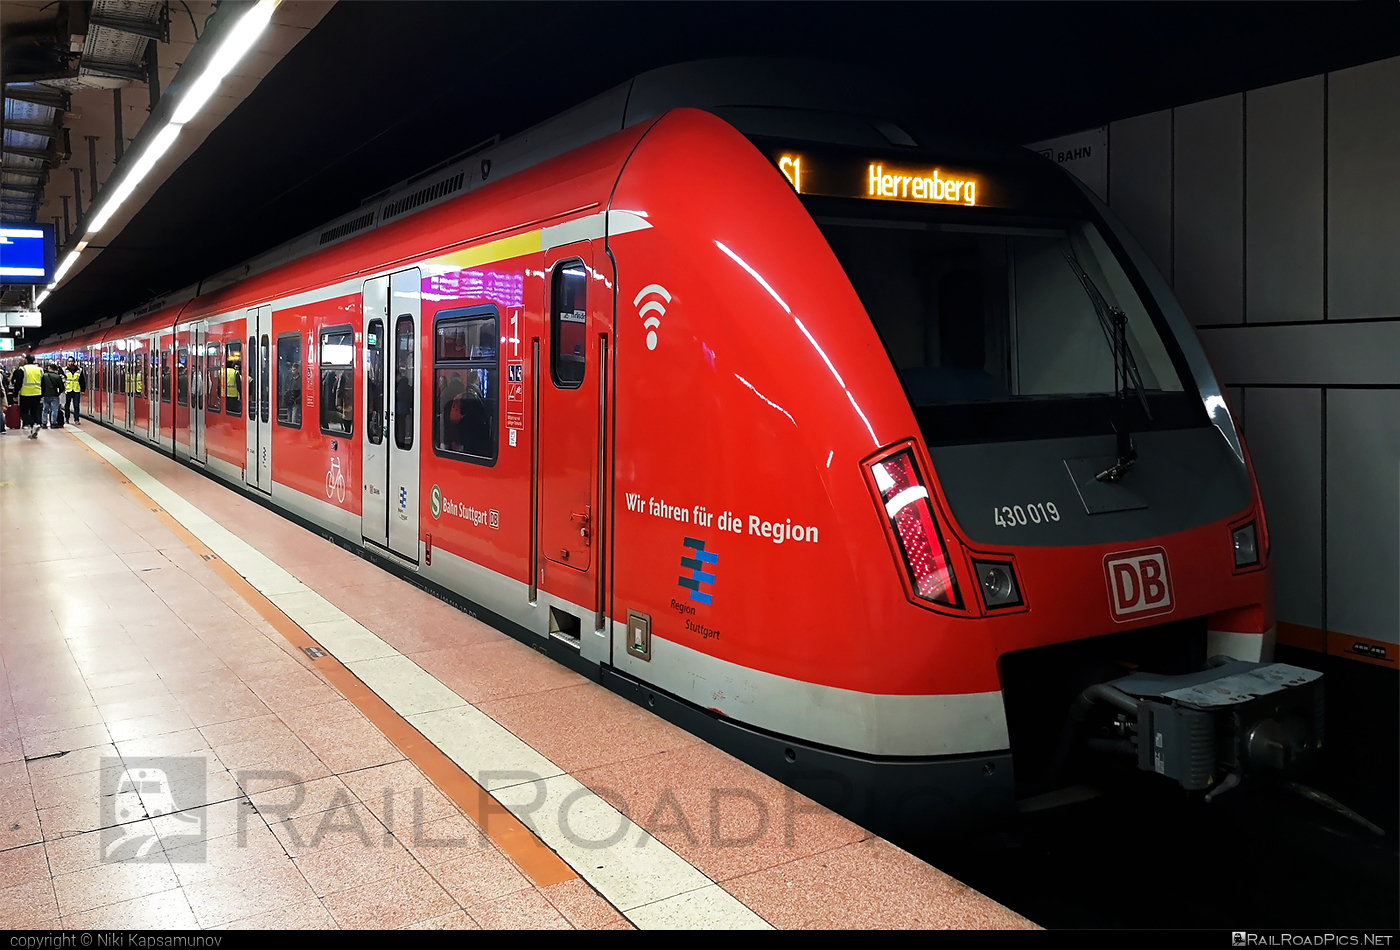 Alstom/Bombardier DB Class 430 - 430 019 operated by Deutsche Bahn / DB AG #alstombombardier #alstombombardier430 #class430 #db #dbclass430 #deutschebahn #sbahn #sbahnstuttgart